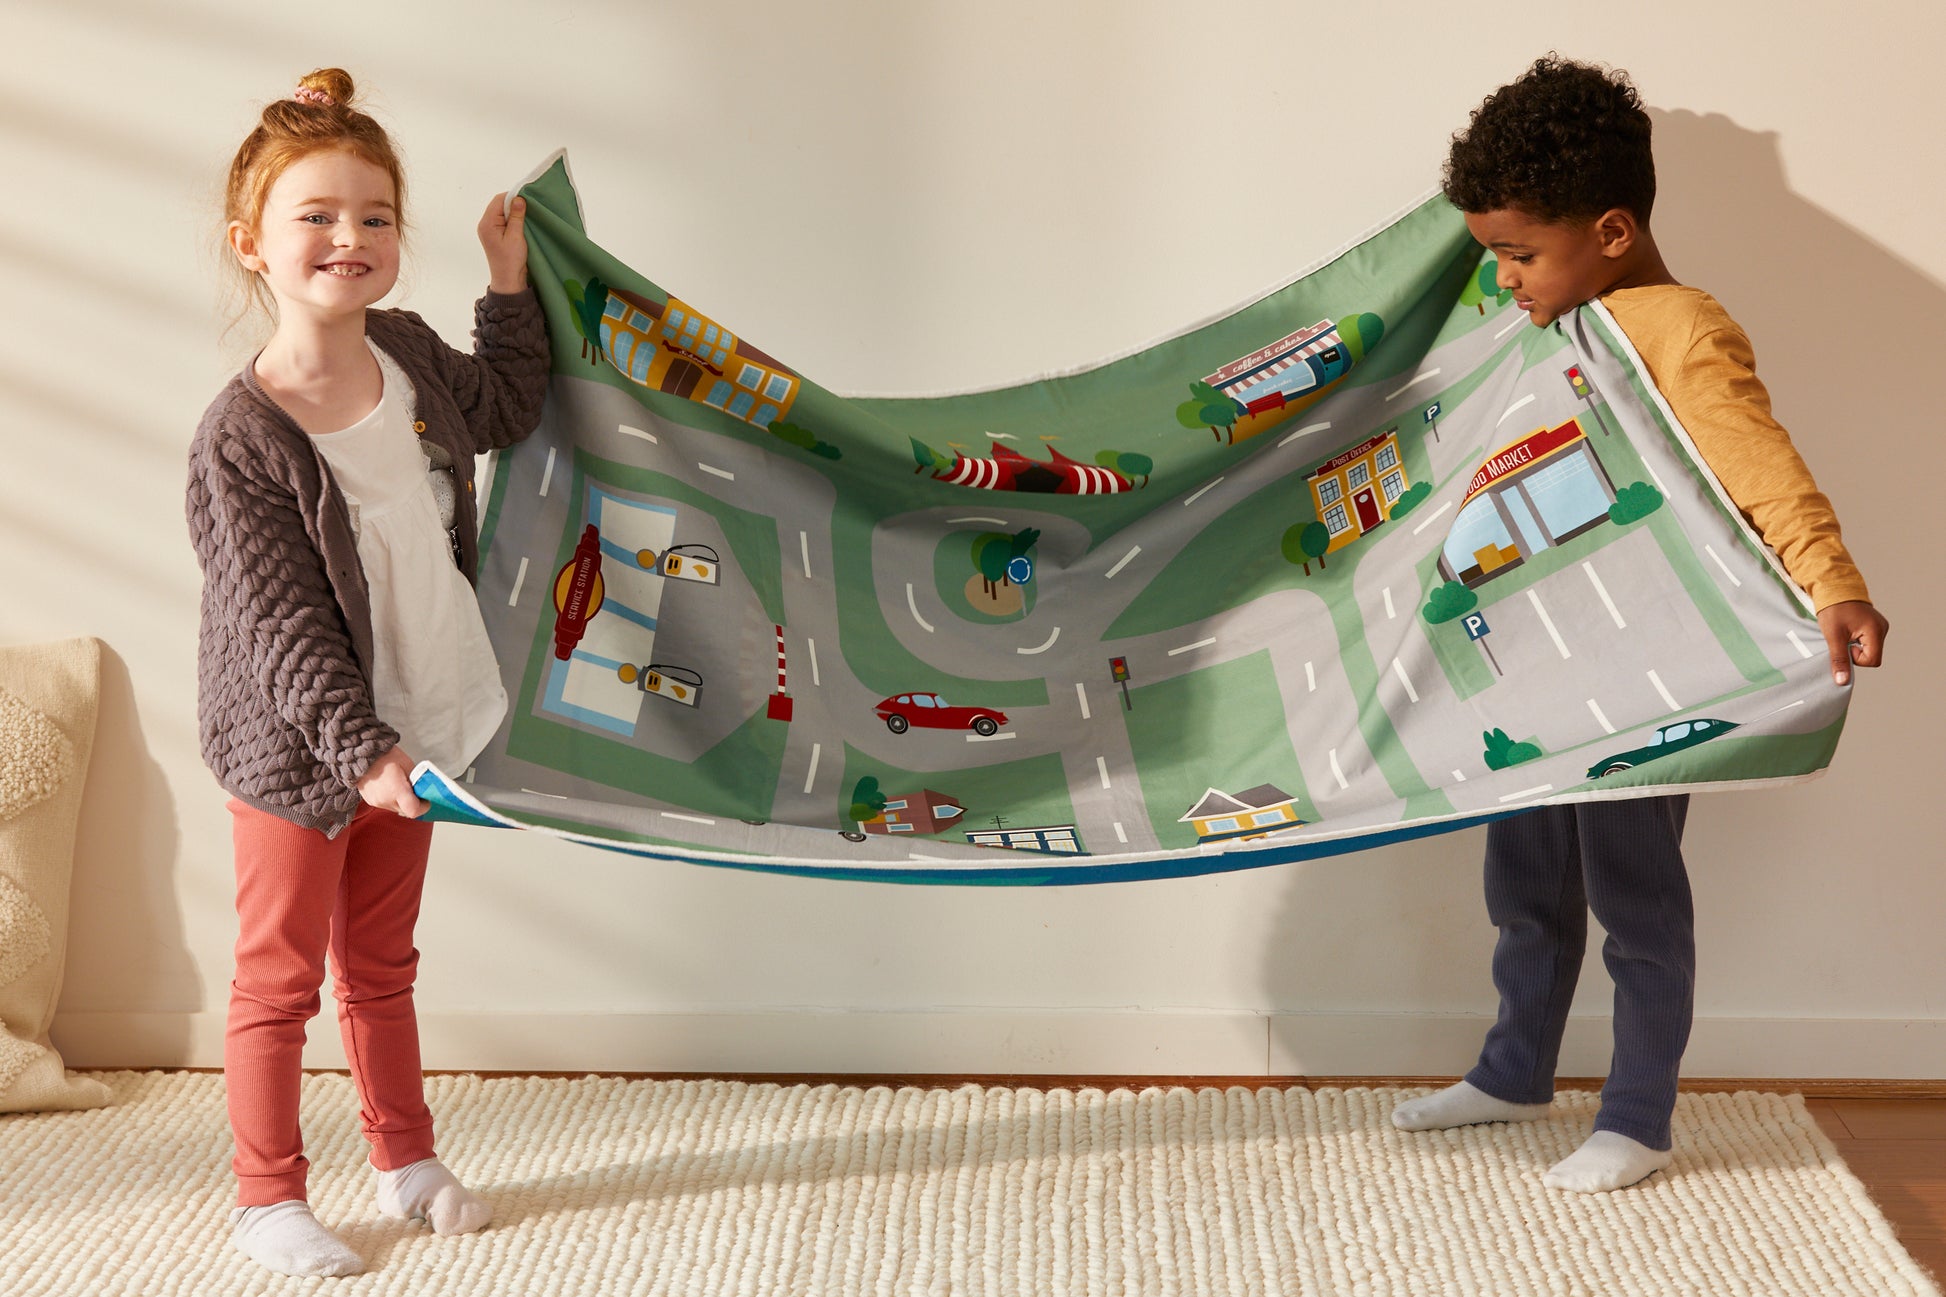 Children playmat, set 100% cotton and FSC timber cars. Size 1m x 1.4m includes carry strap and 2 cars. Double sided printed (Race track & town theme) Portable, lightweight, durable and washable. Perfect portable solution for busy caregivers. Supports your child's imagination. Environmentally friendly packaging.